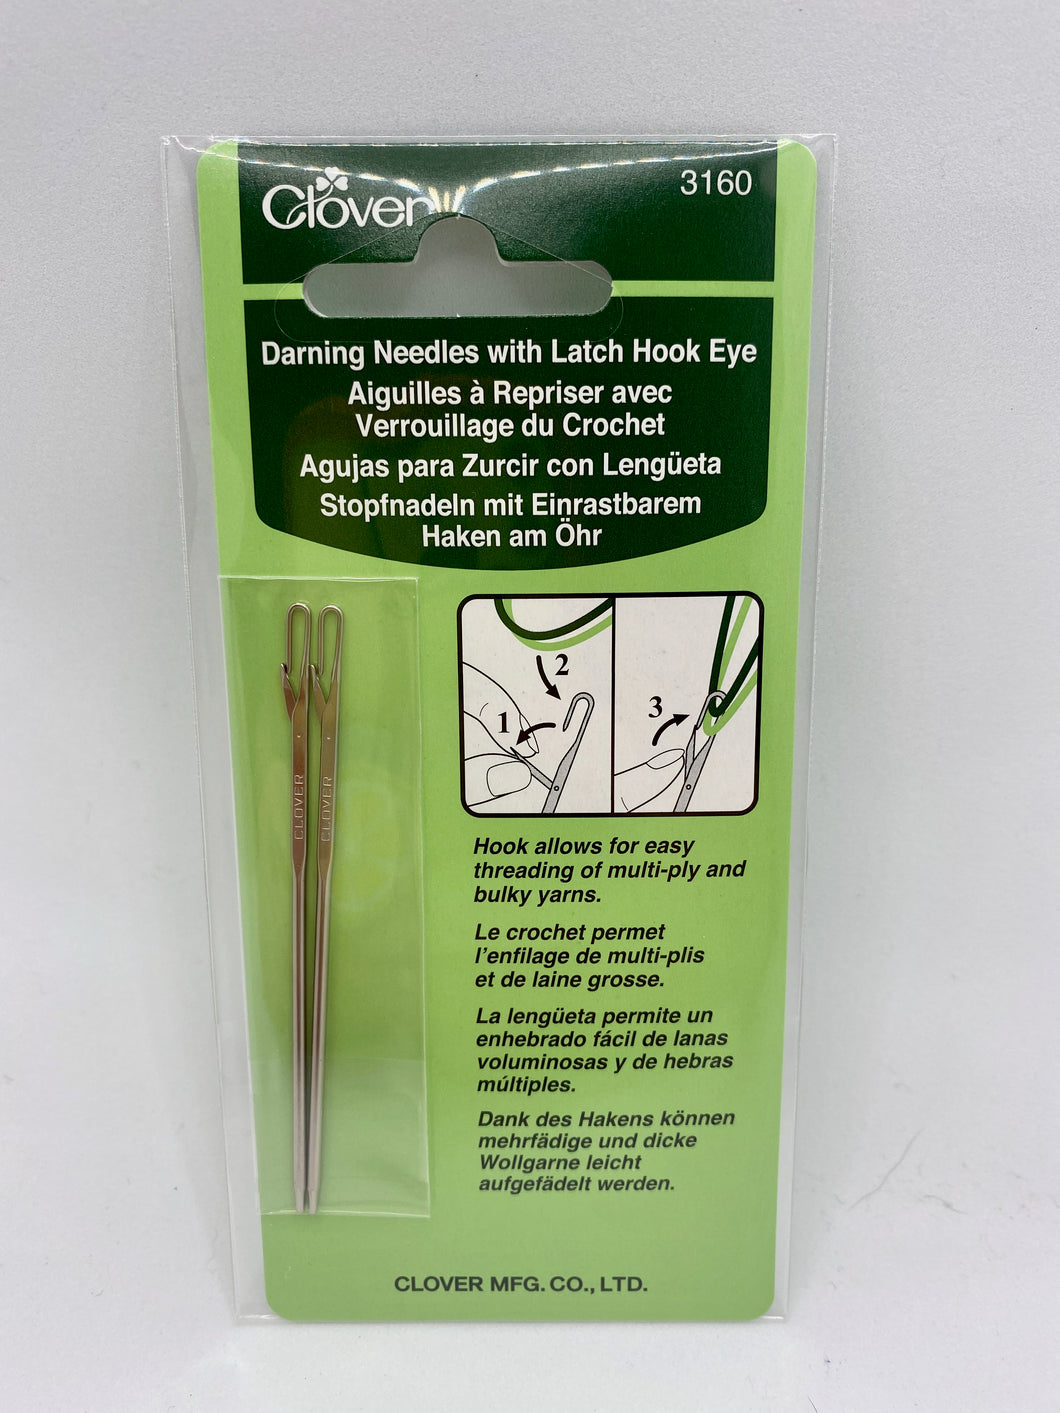 Darning Needles with Latch Hook Eye by Clover